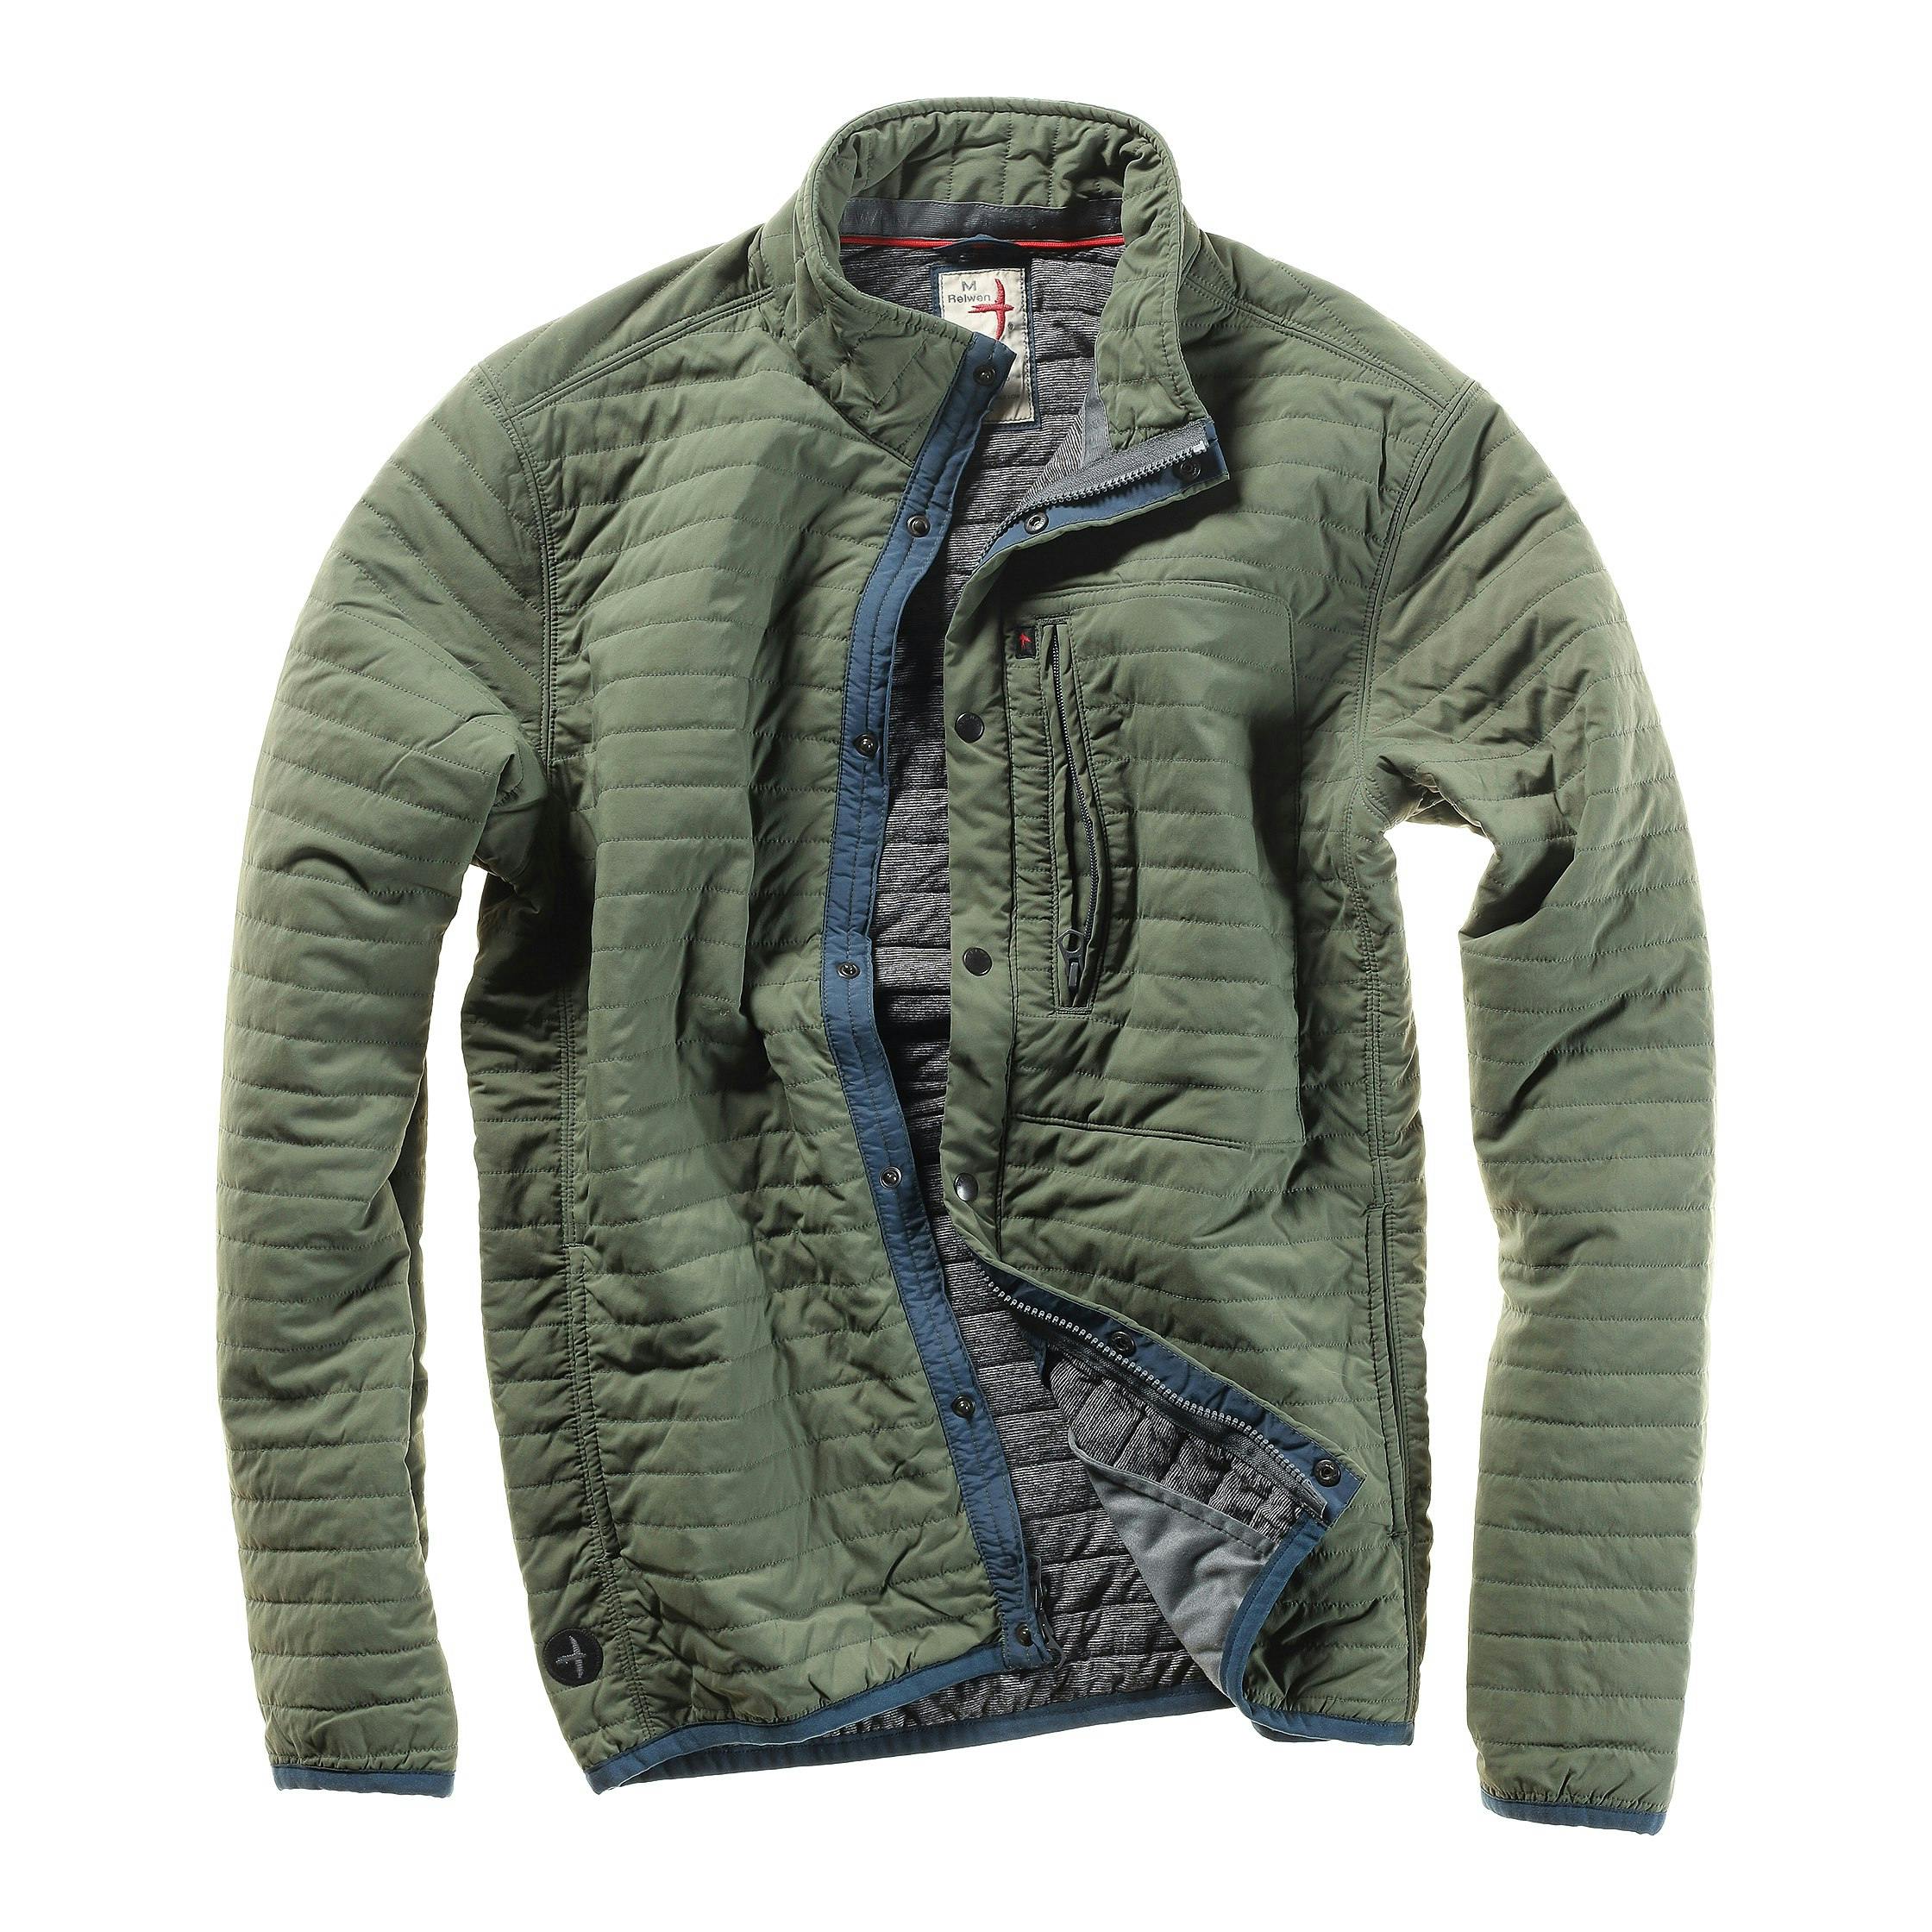 Relwen Quilted Insulated Tanker Jacket - Steel Gray, Insulated Jackets